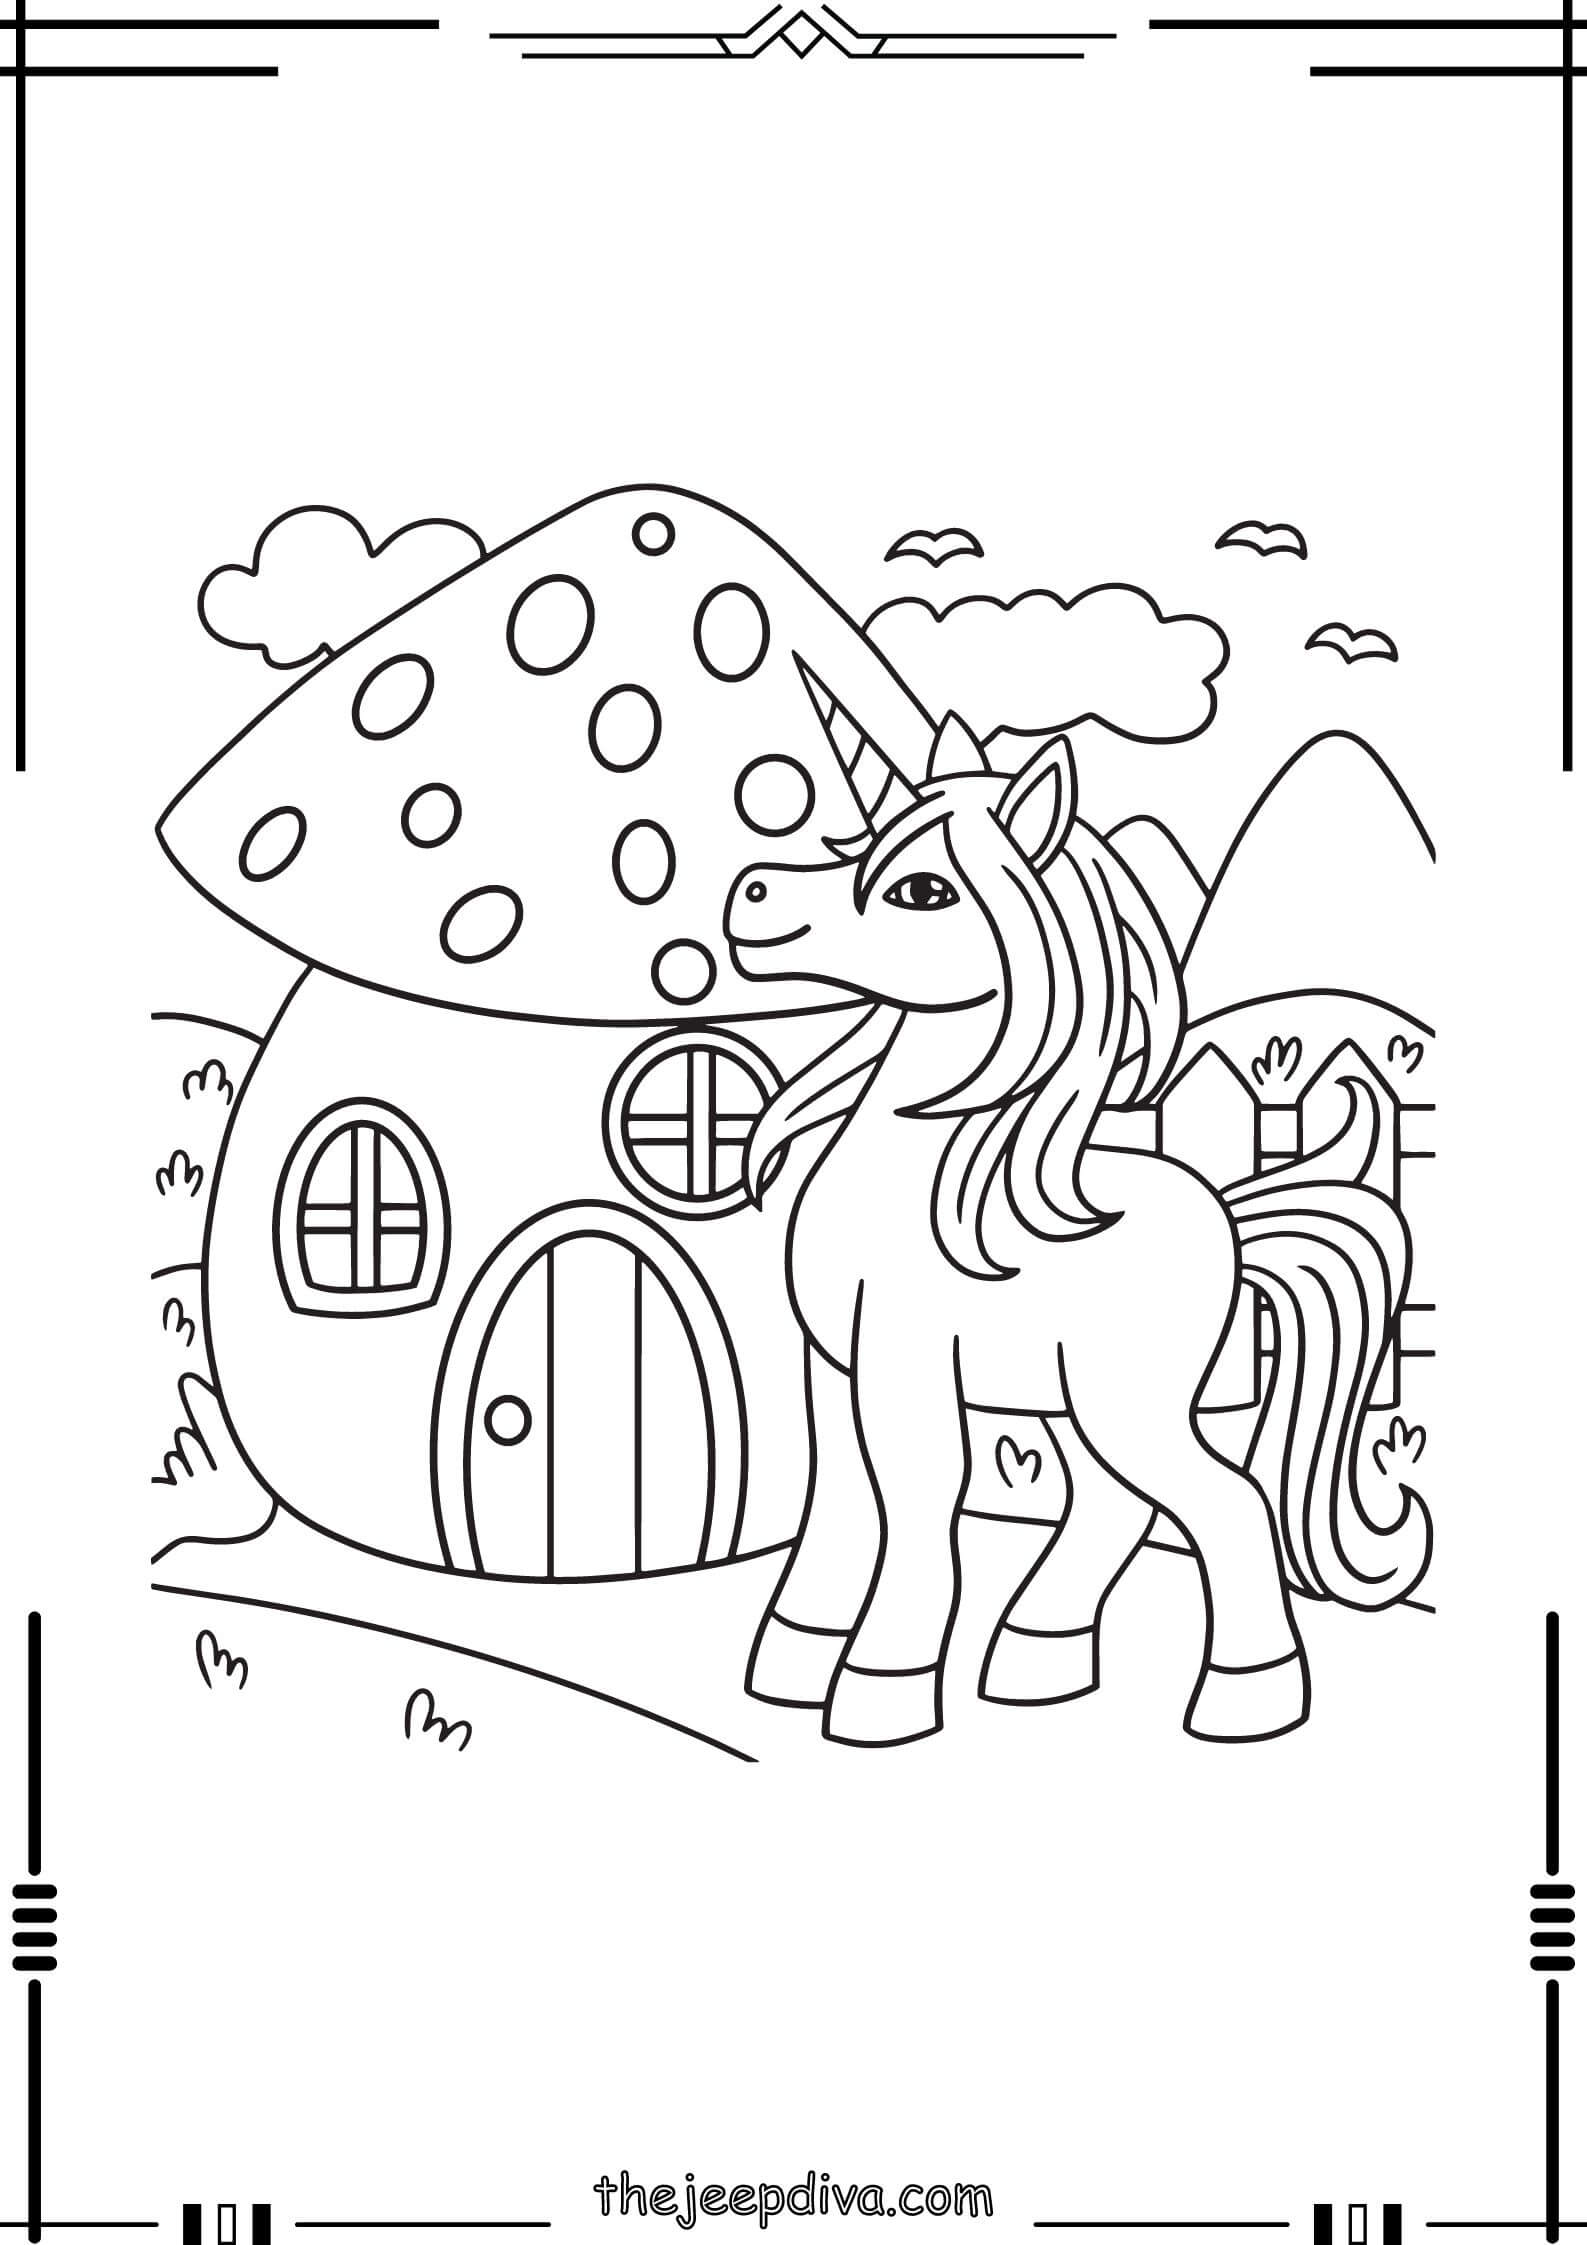 unicorn-coloring-page-easy-21